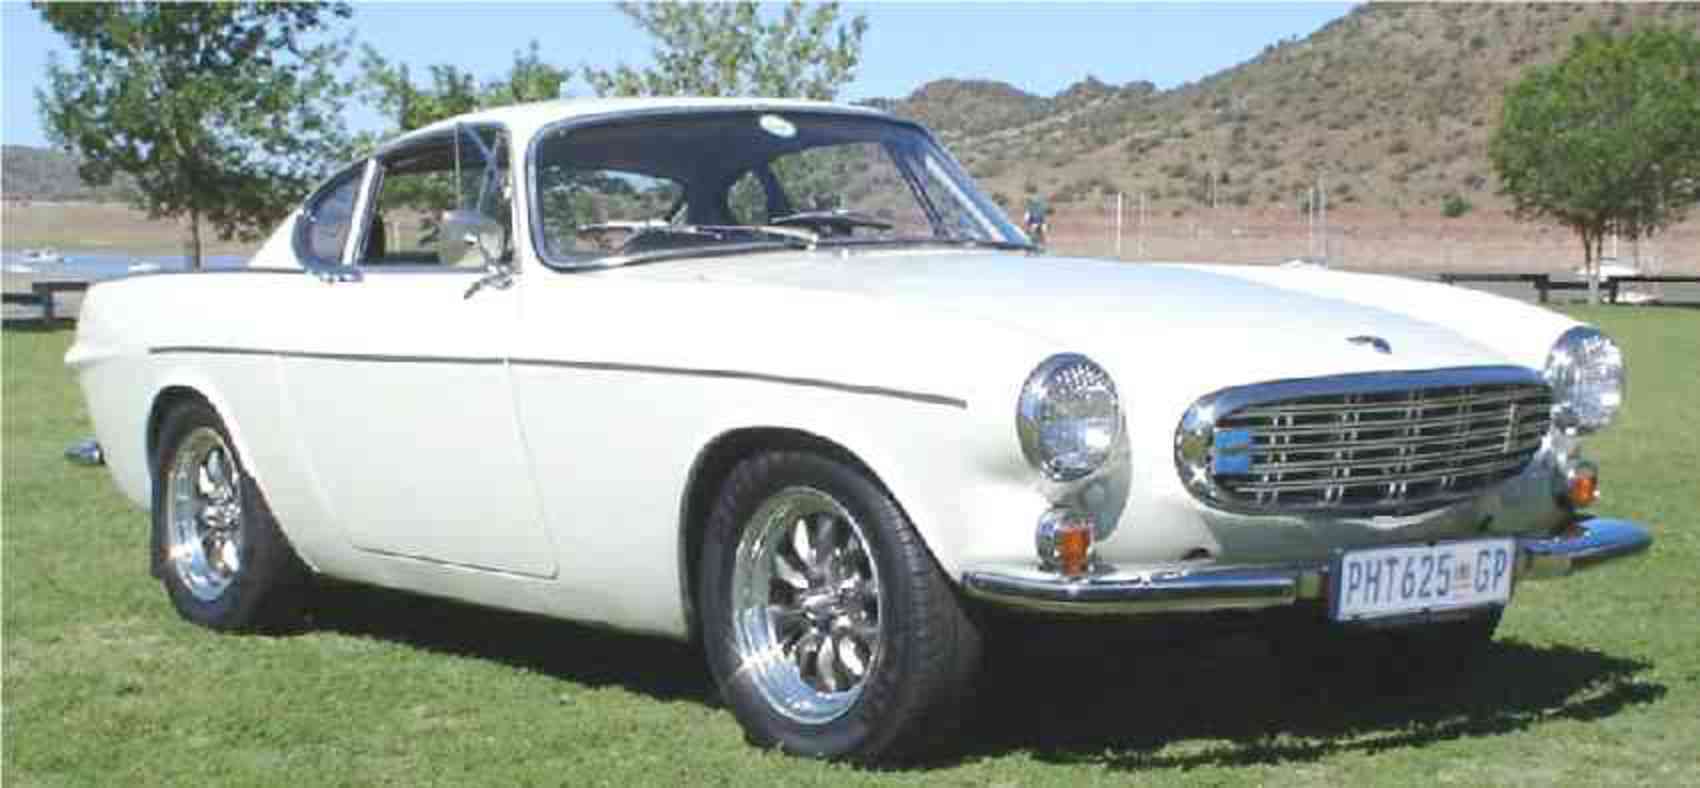 A 1969 Volvo 1800s. Courtesy of the owner: Deon van Loggerenberg South